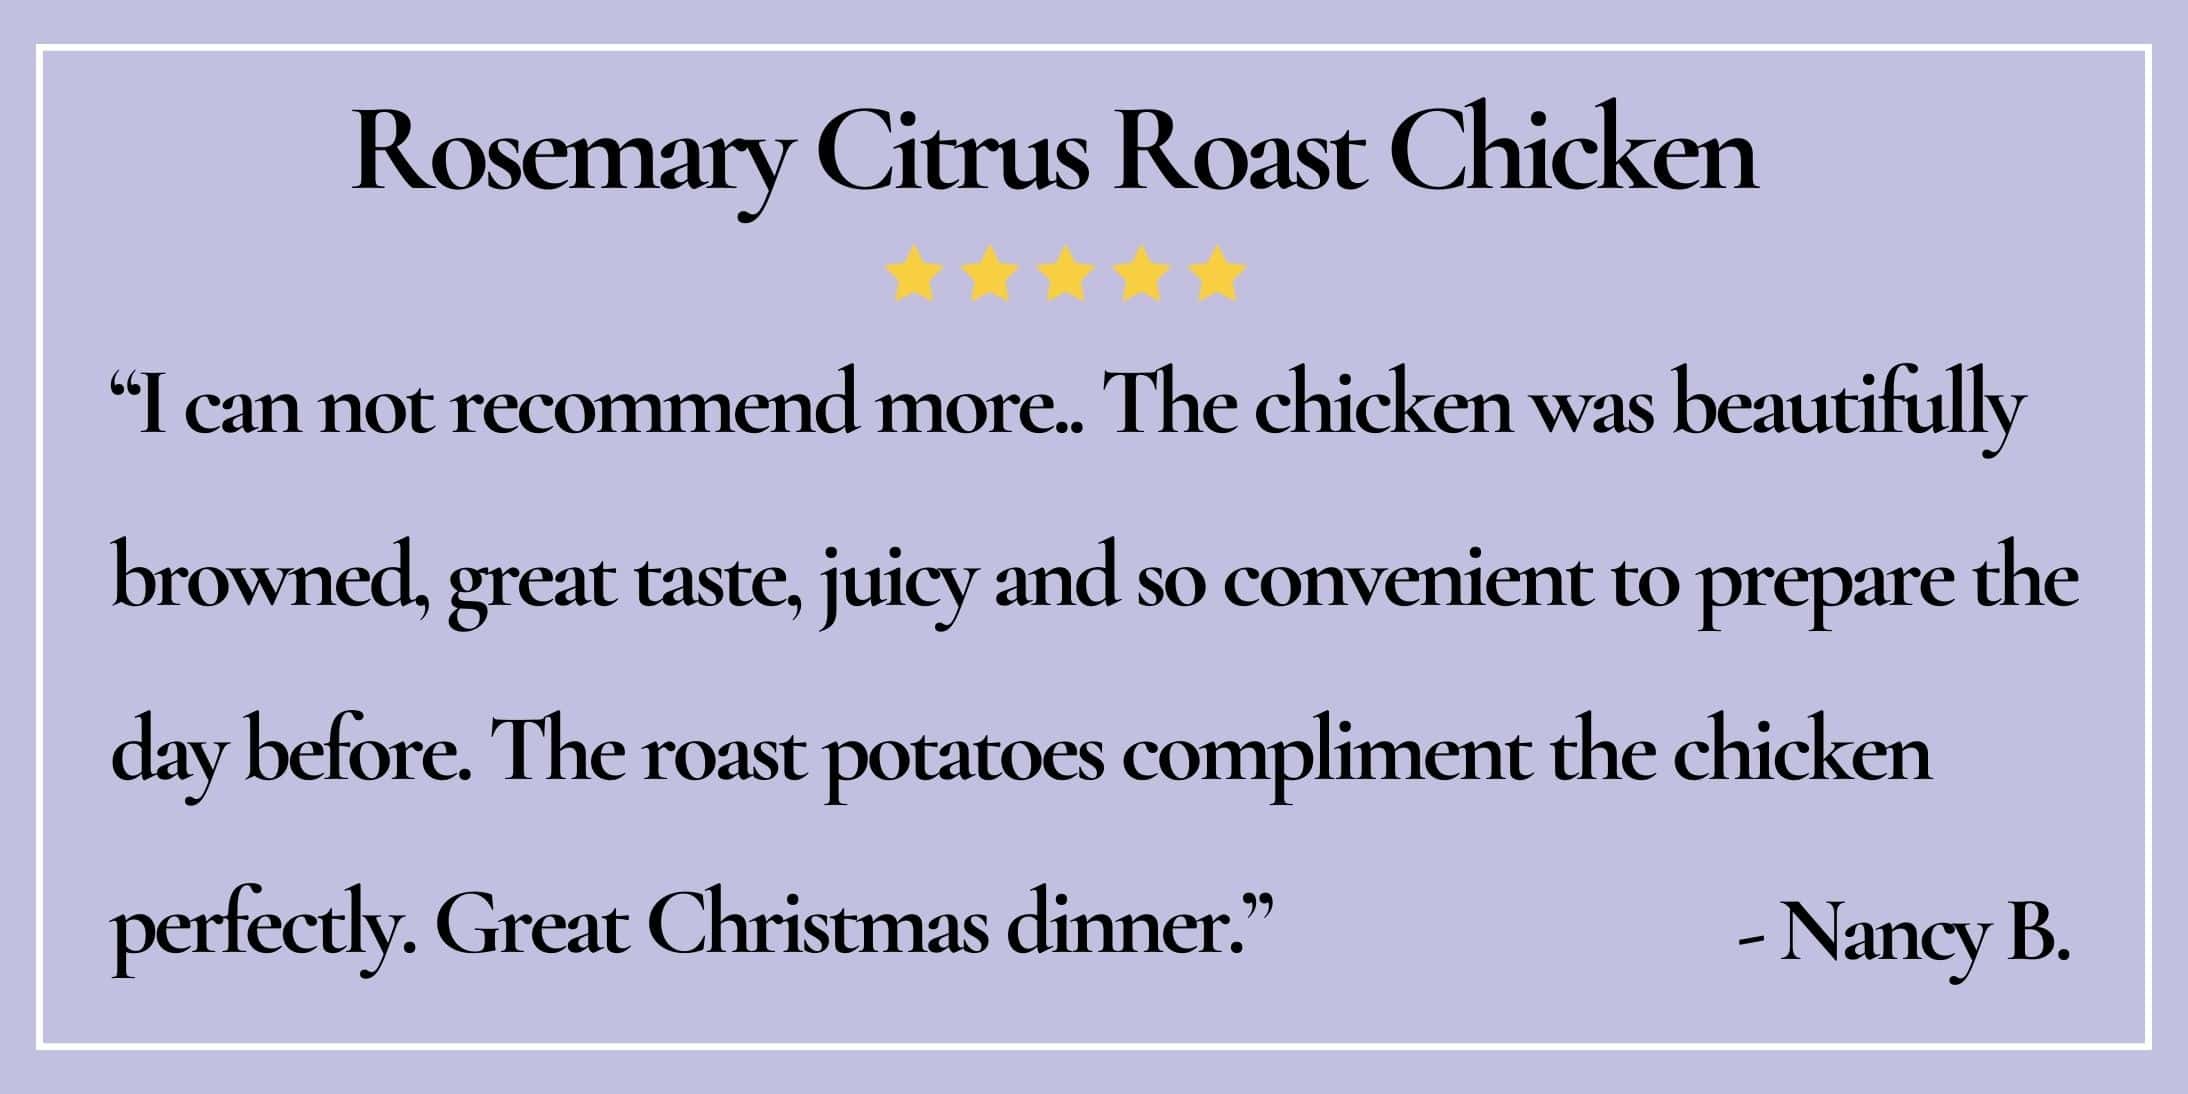 Text box with paraphrase: I can not recommend more... The chicken was beautifully browned, great taste, juicy... -Nancy B.